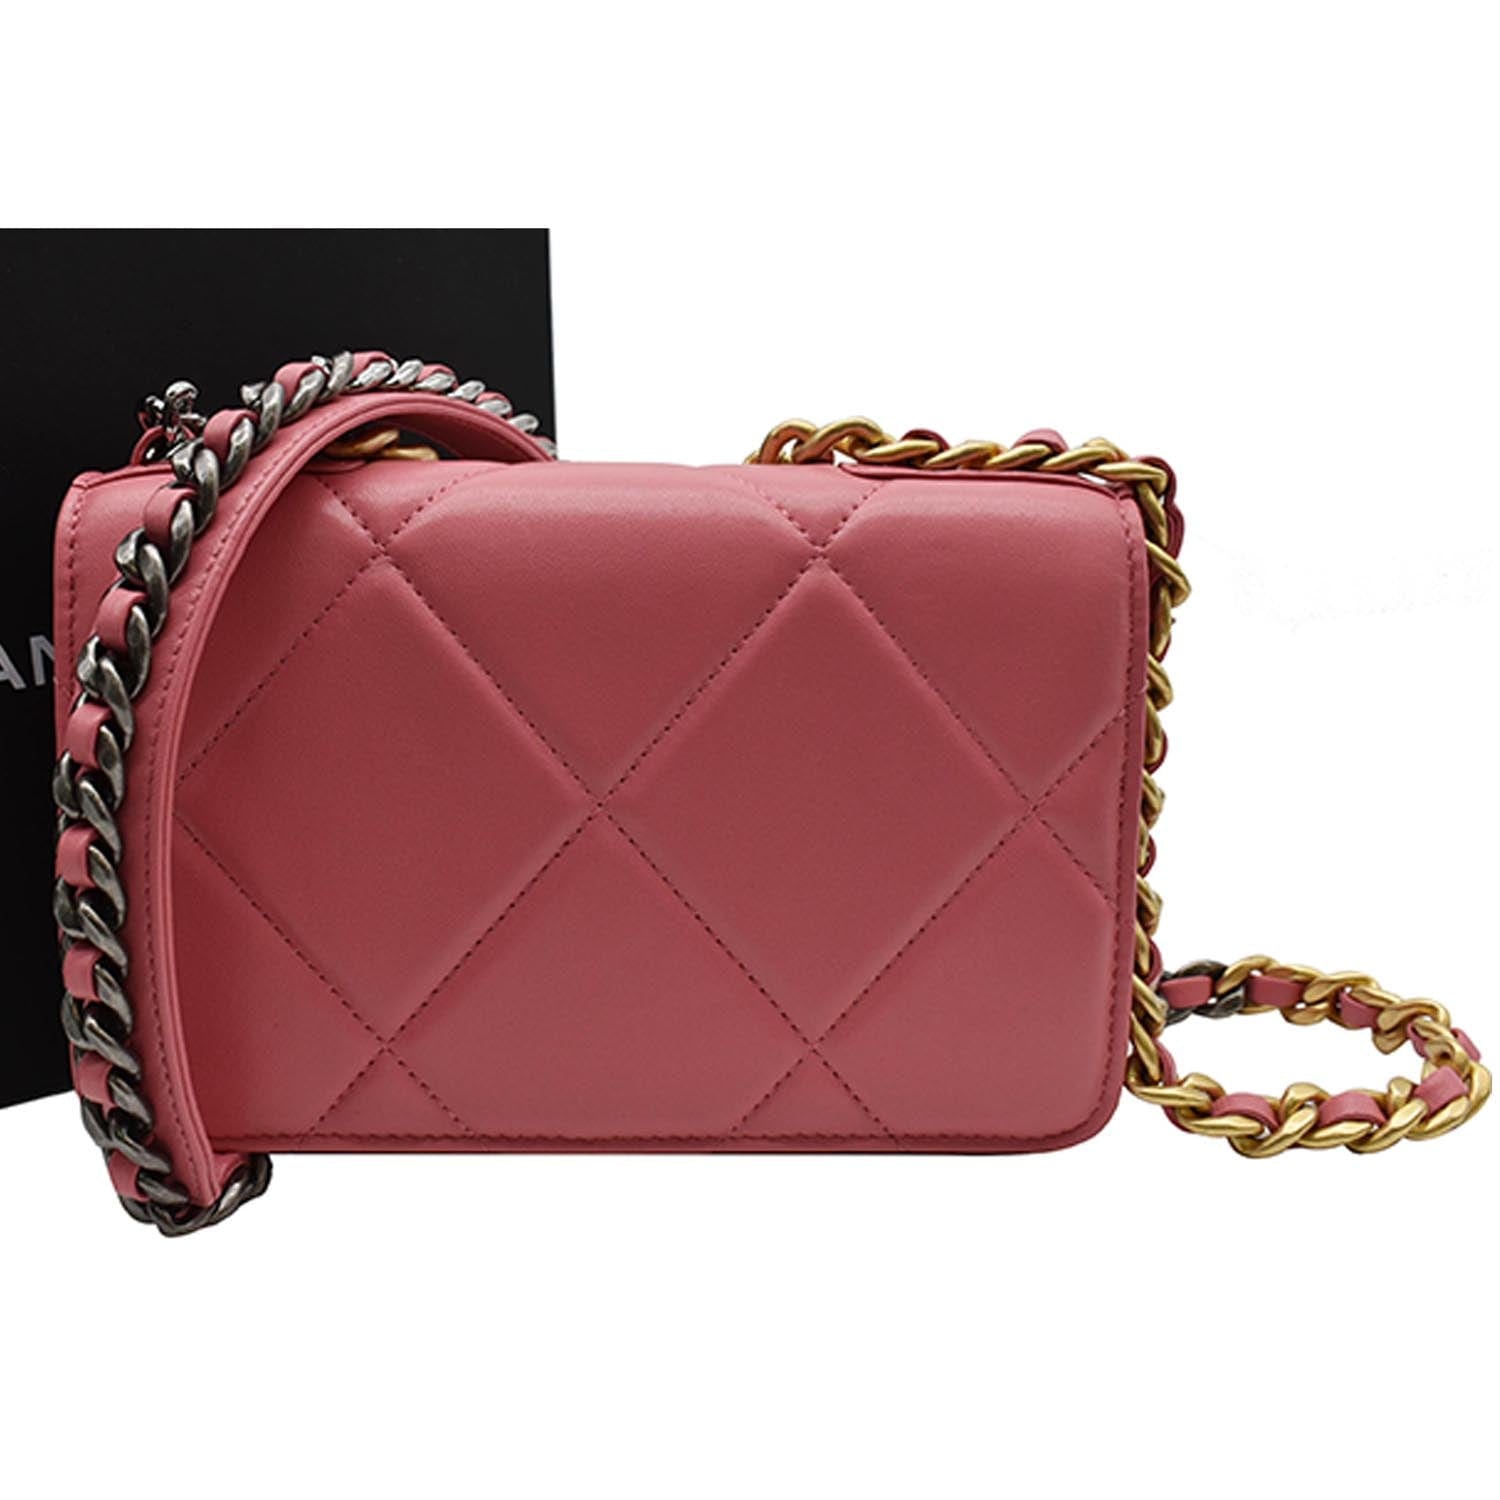 Classics - grained calfskin & gold metal-black & burgundy, Chanel WOC,  wallet on chain $2100